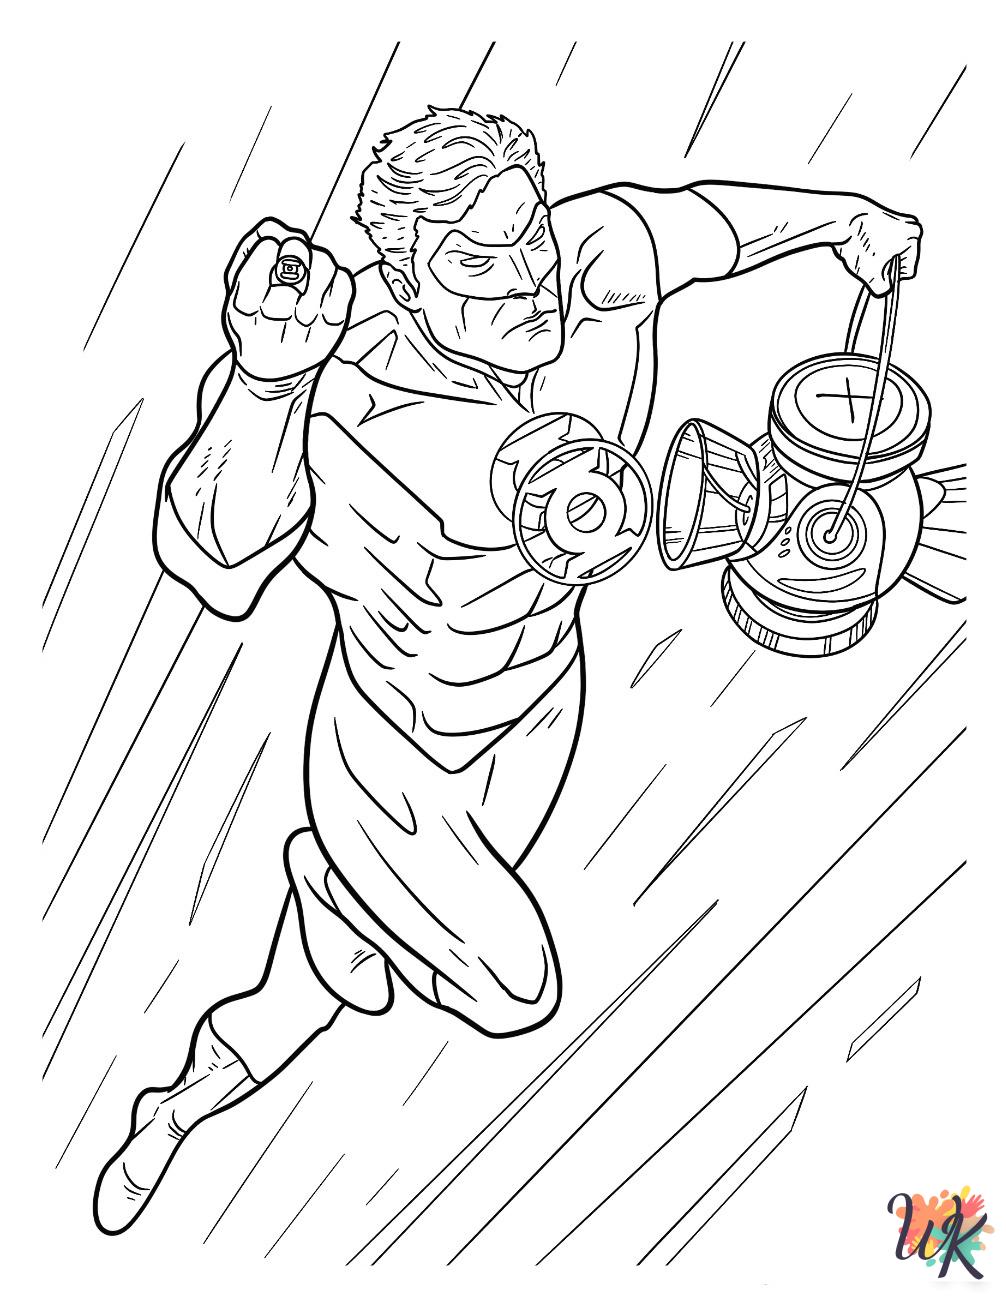 Green Lantern coloring pages for adults